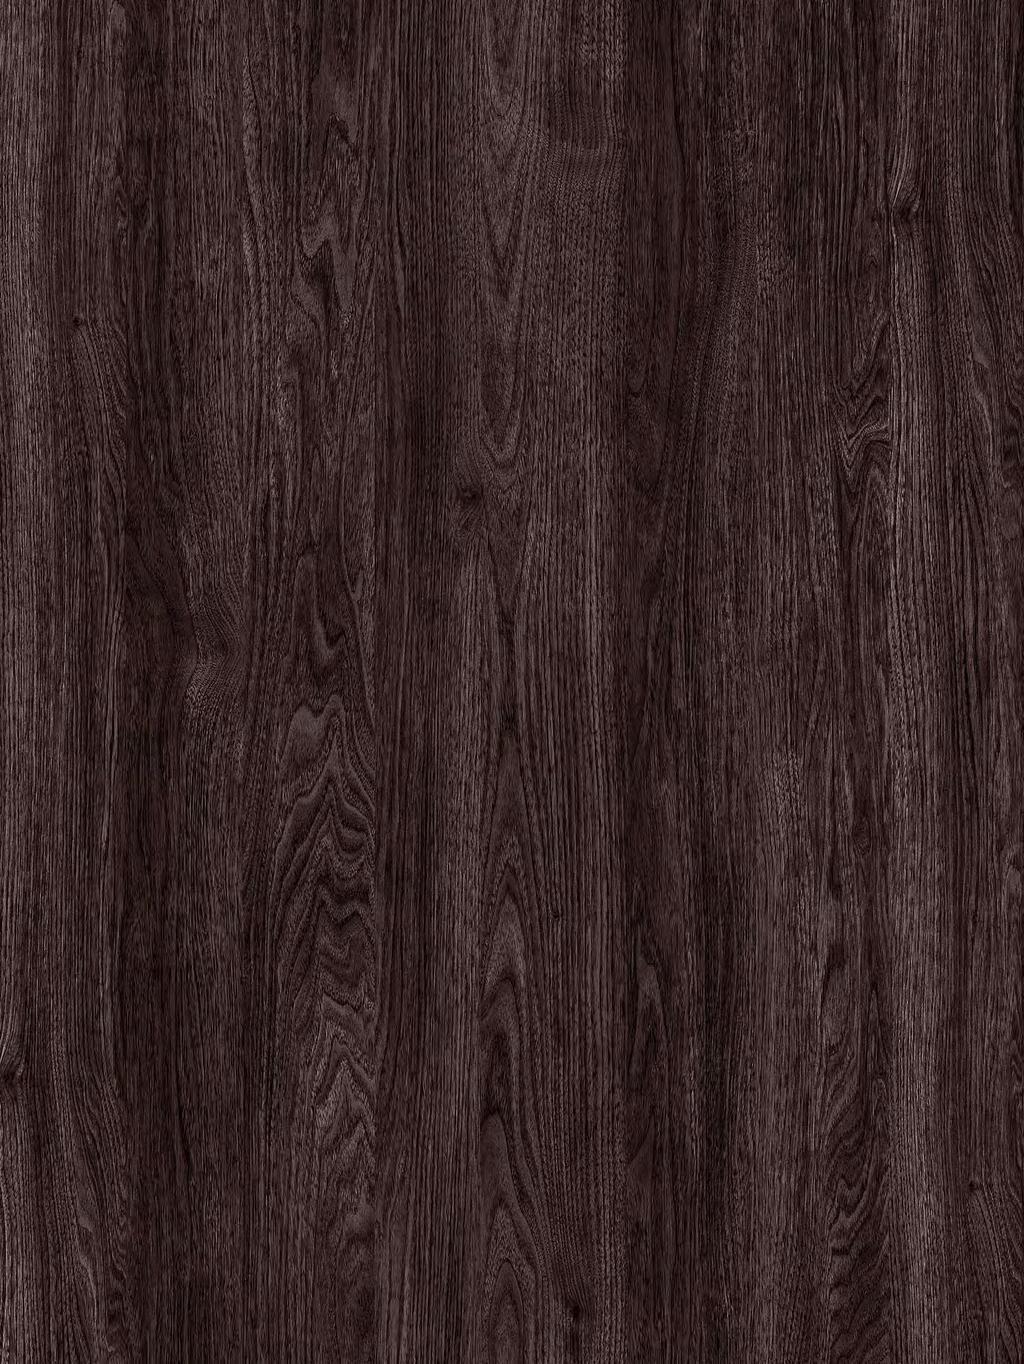 New! BLEACHED BLACKWOOD 4x8 Engraved In Register (EIR) Where the texture